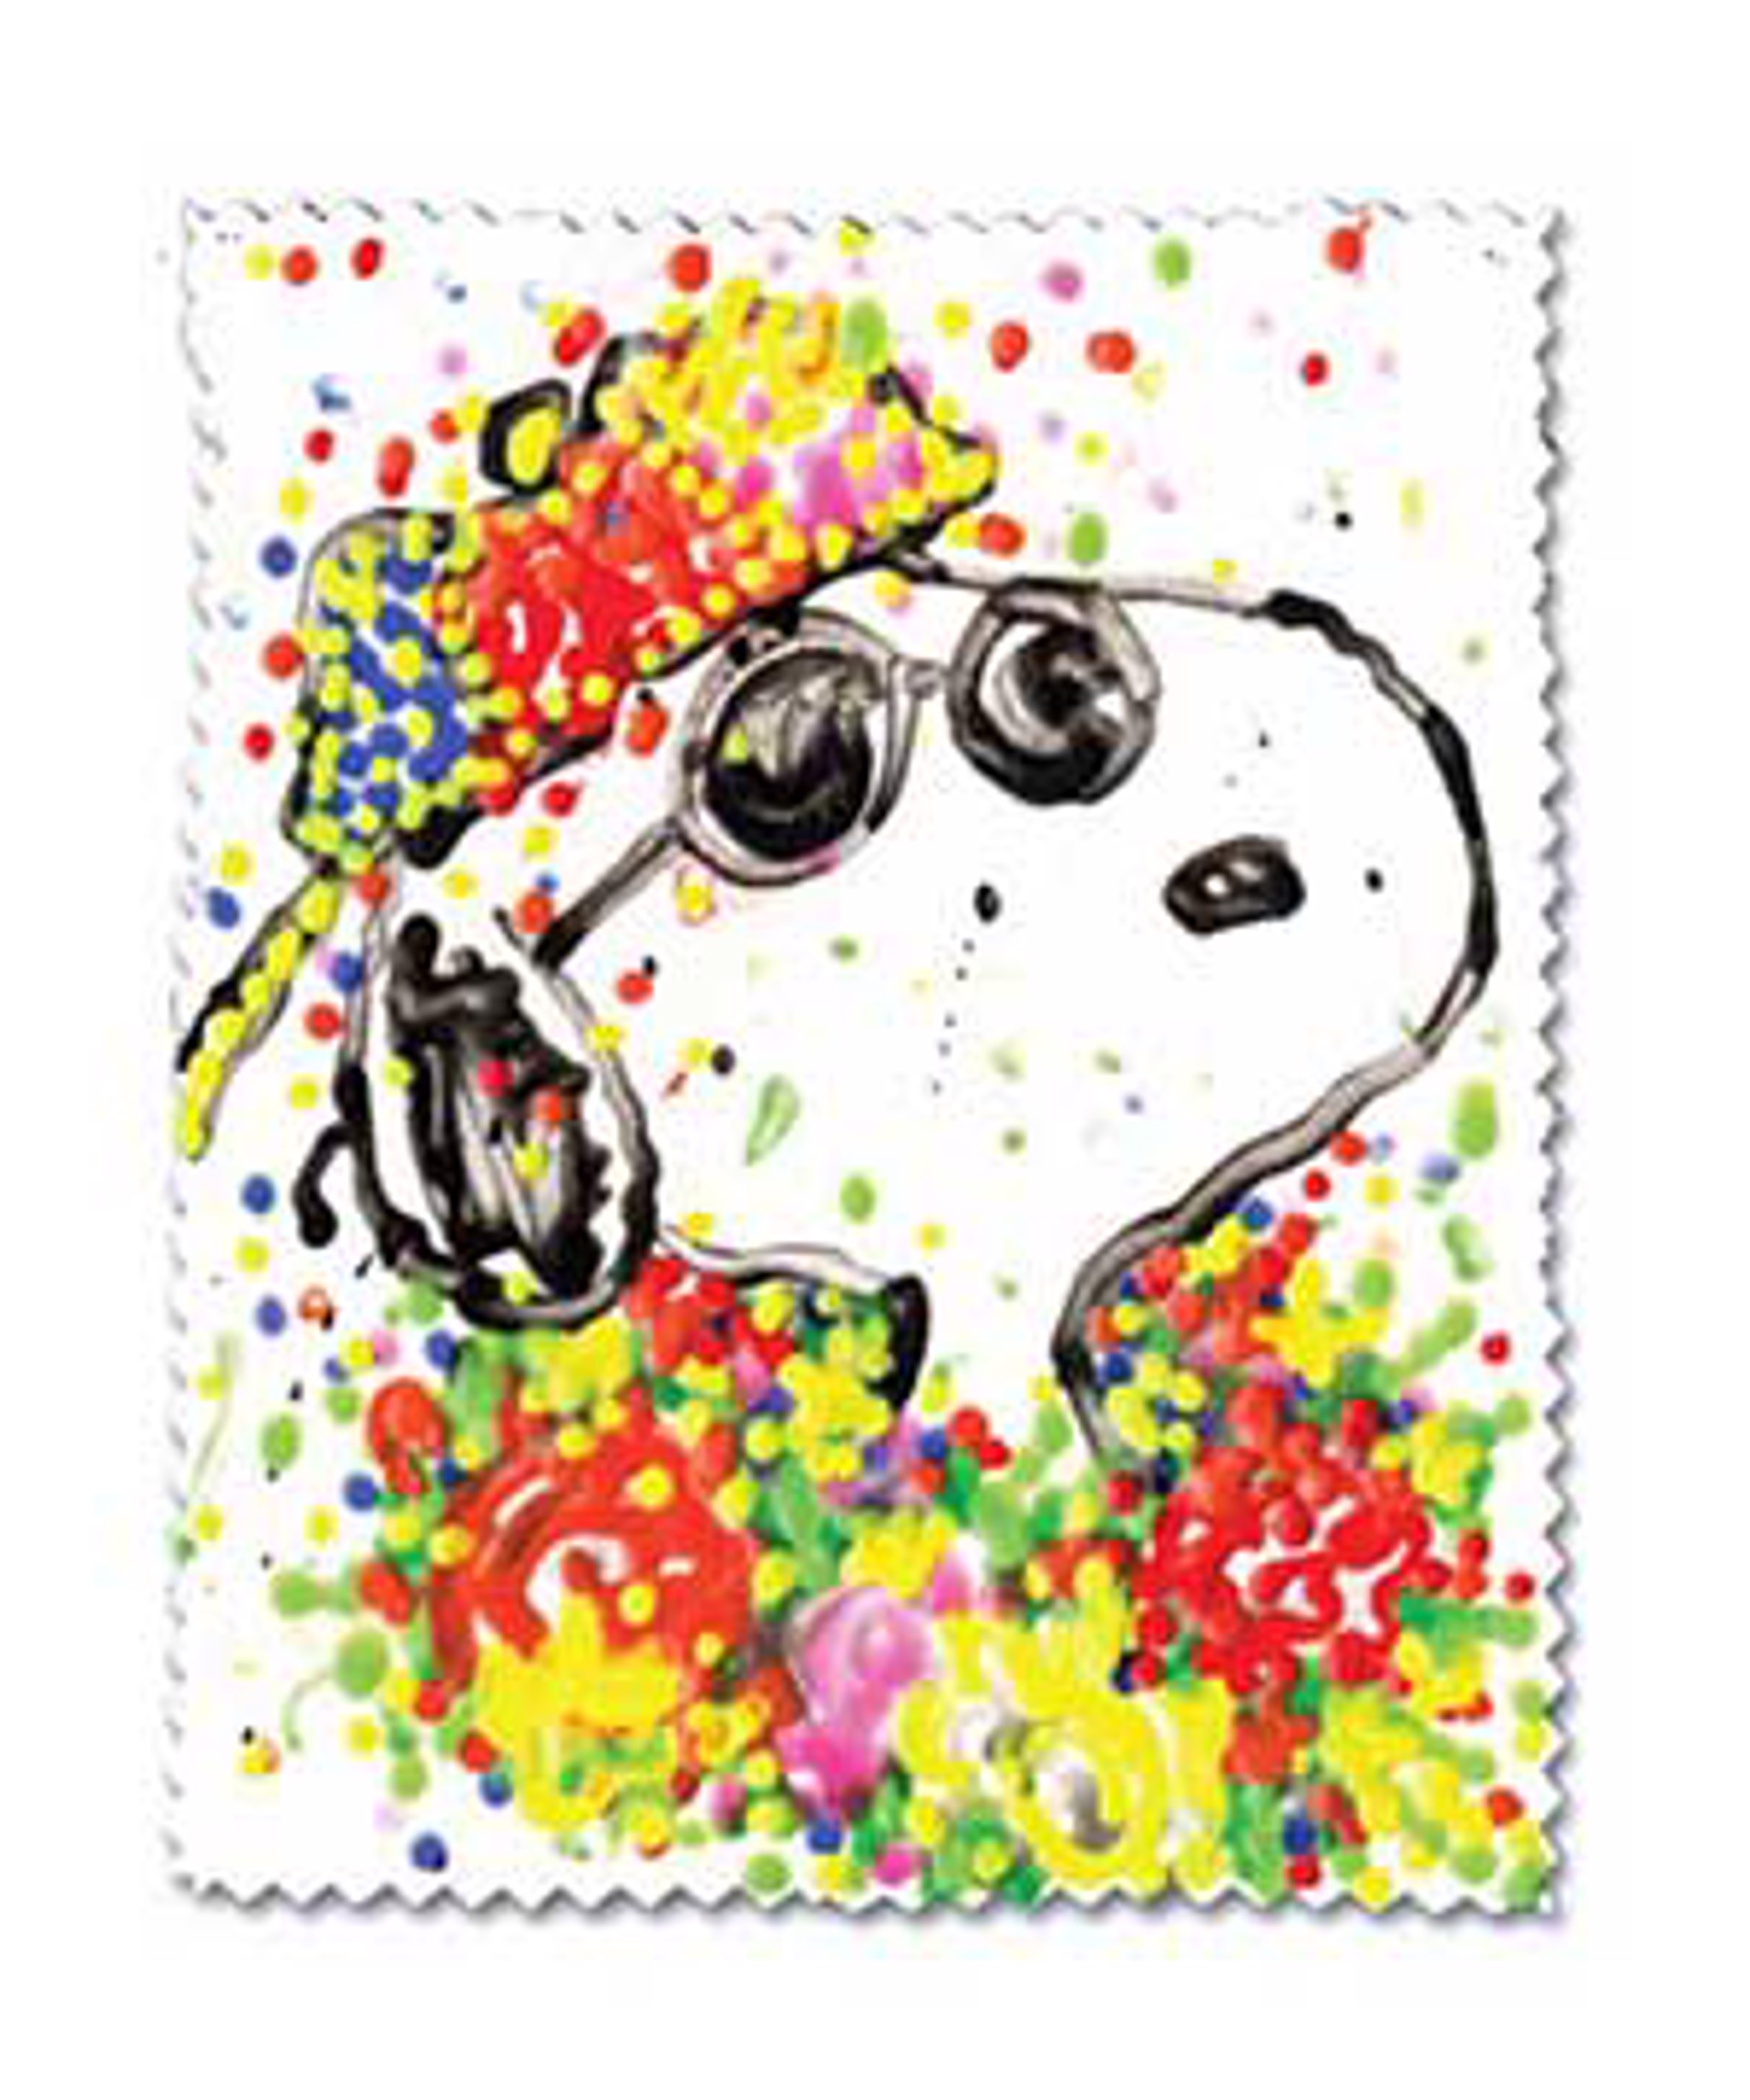 Tahitian Hipster VI by Tom Everhart